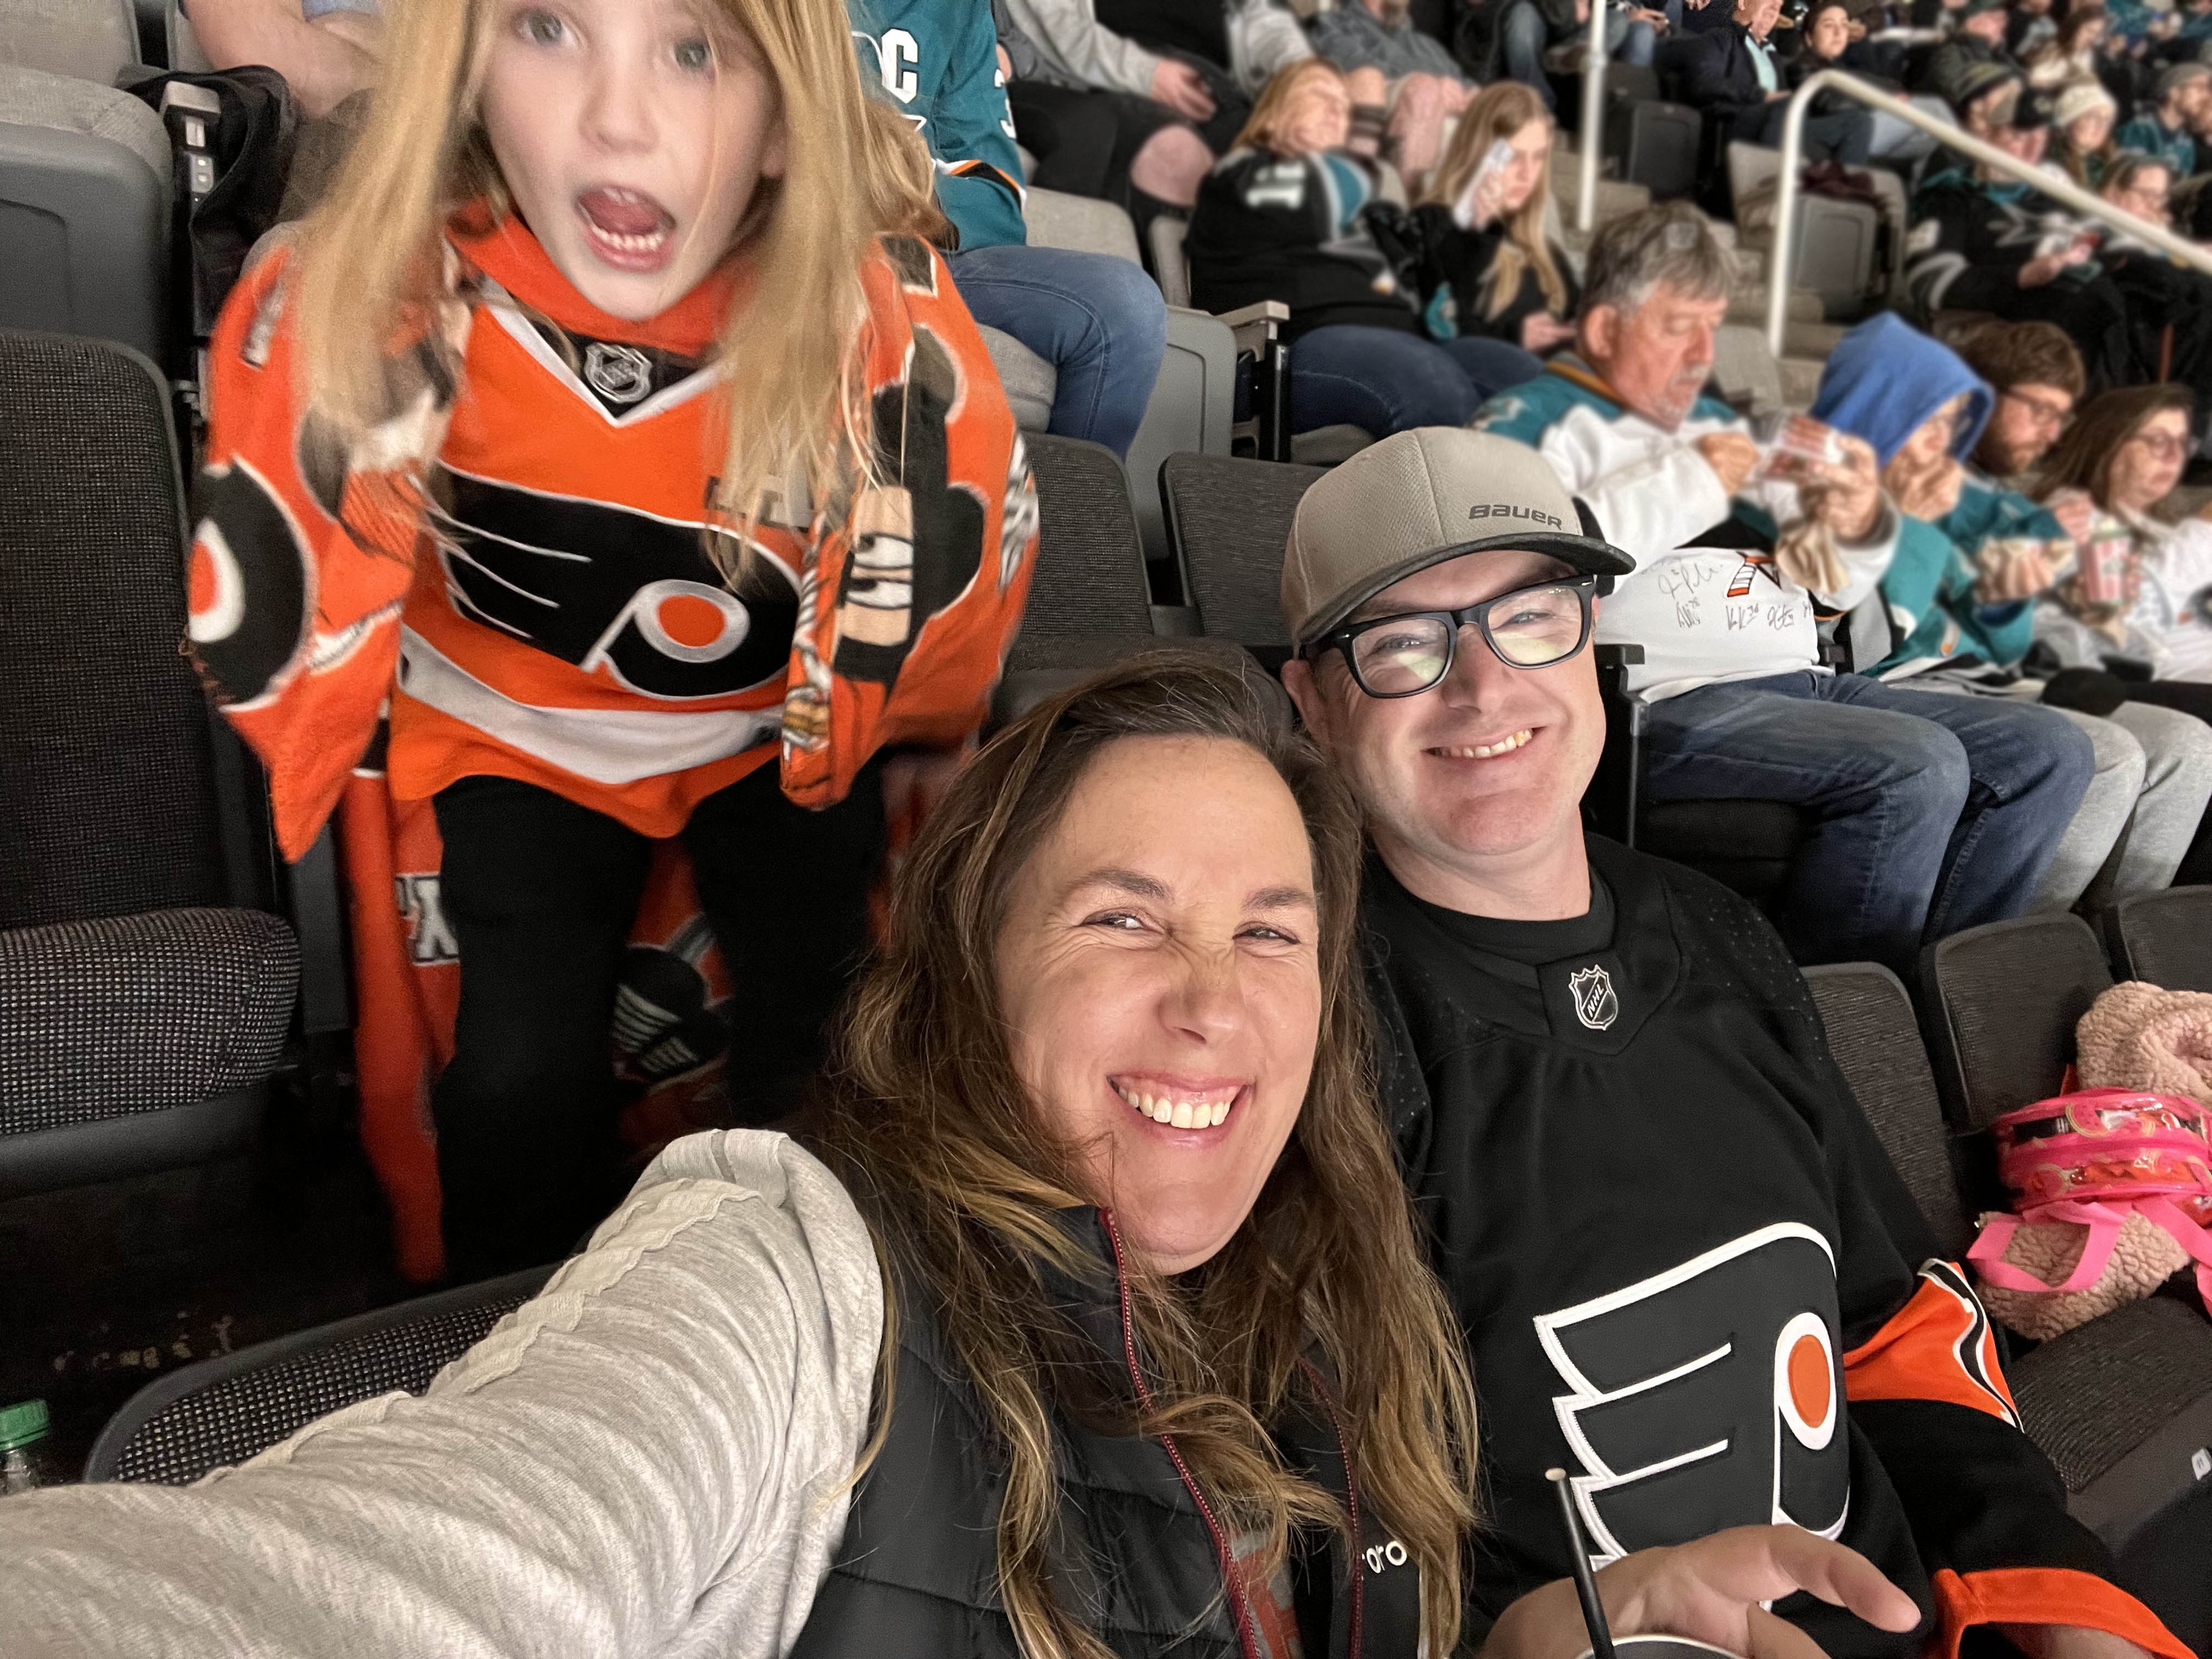 Our hockey family at a sharks game while wearing flyers gear